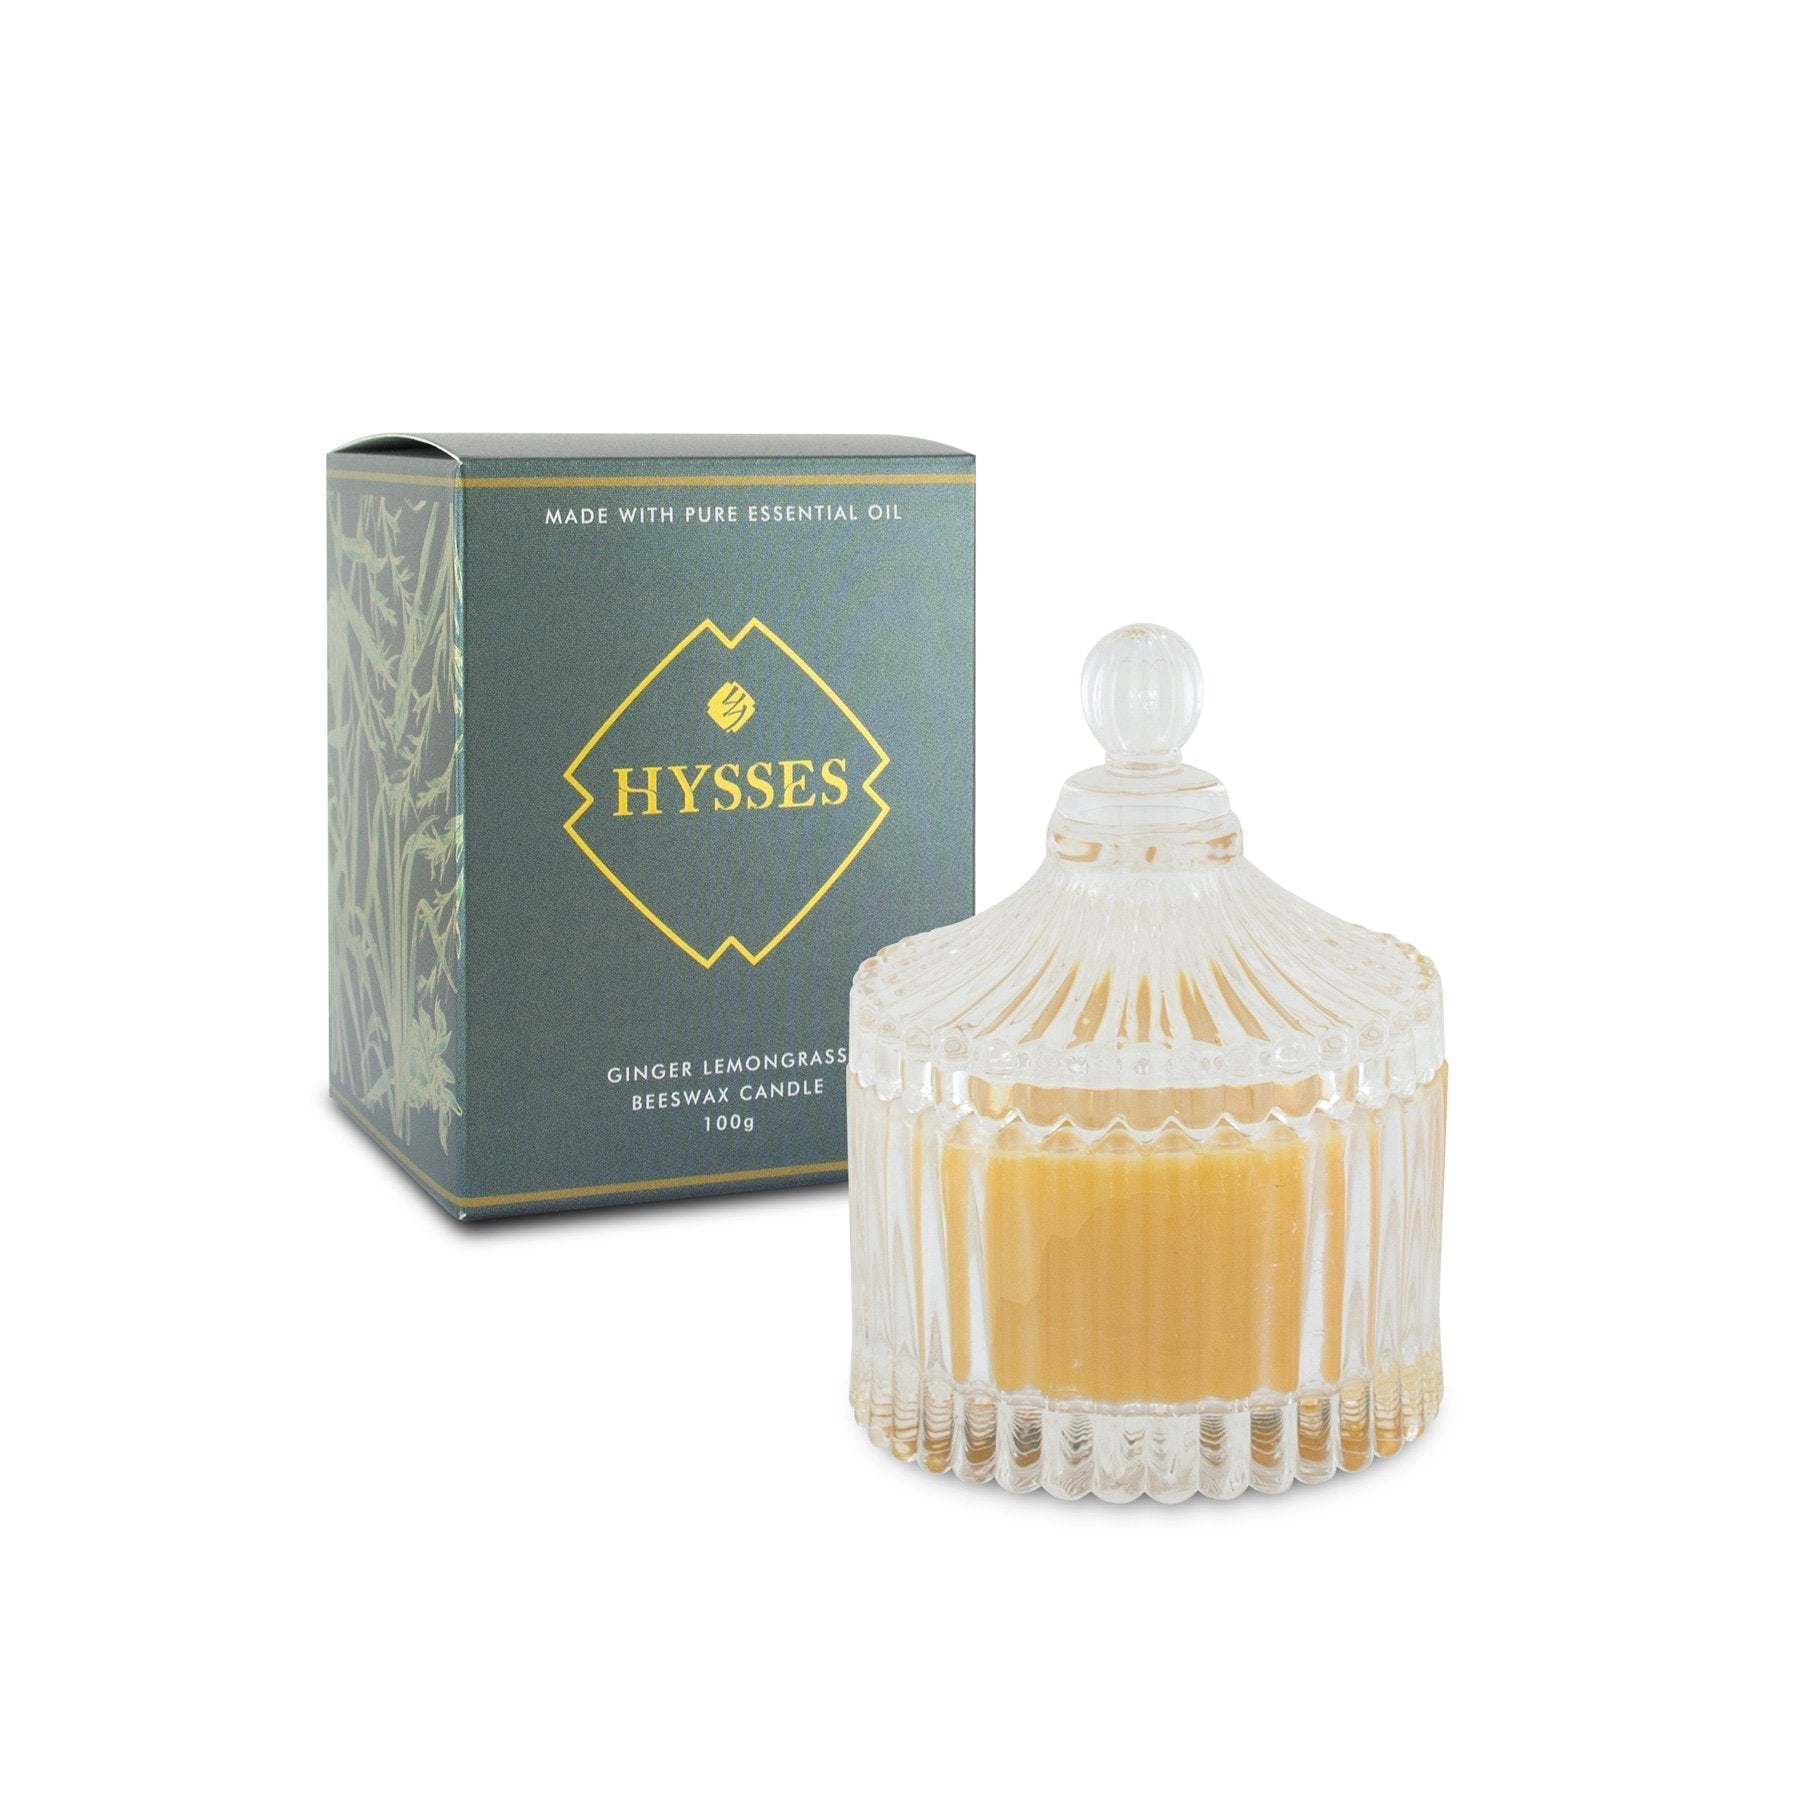 Hysses Home Scents 100g Beeswax Candle Ginger Lemongrass, 100g